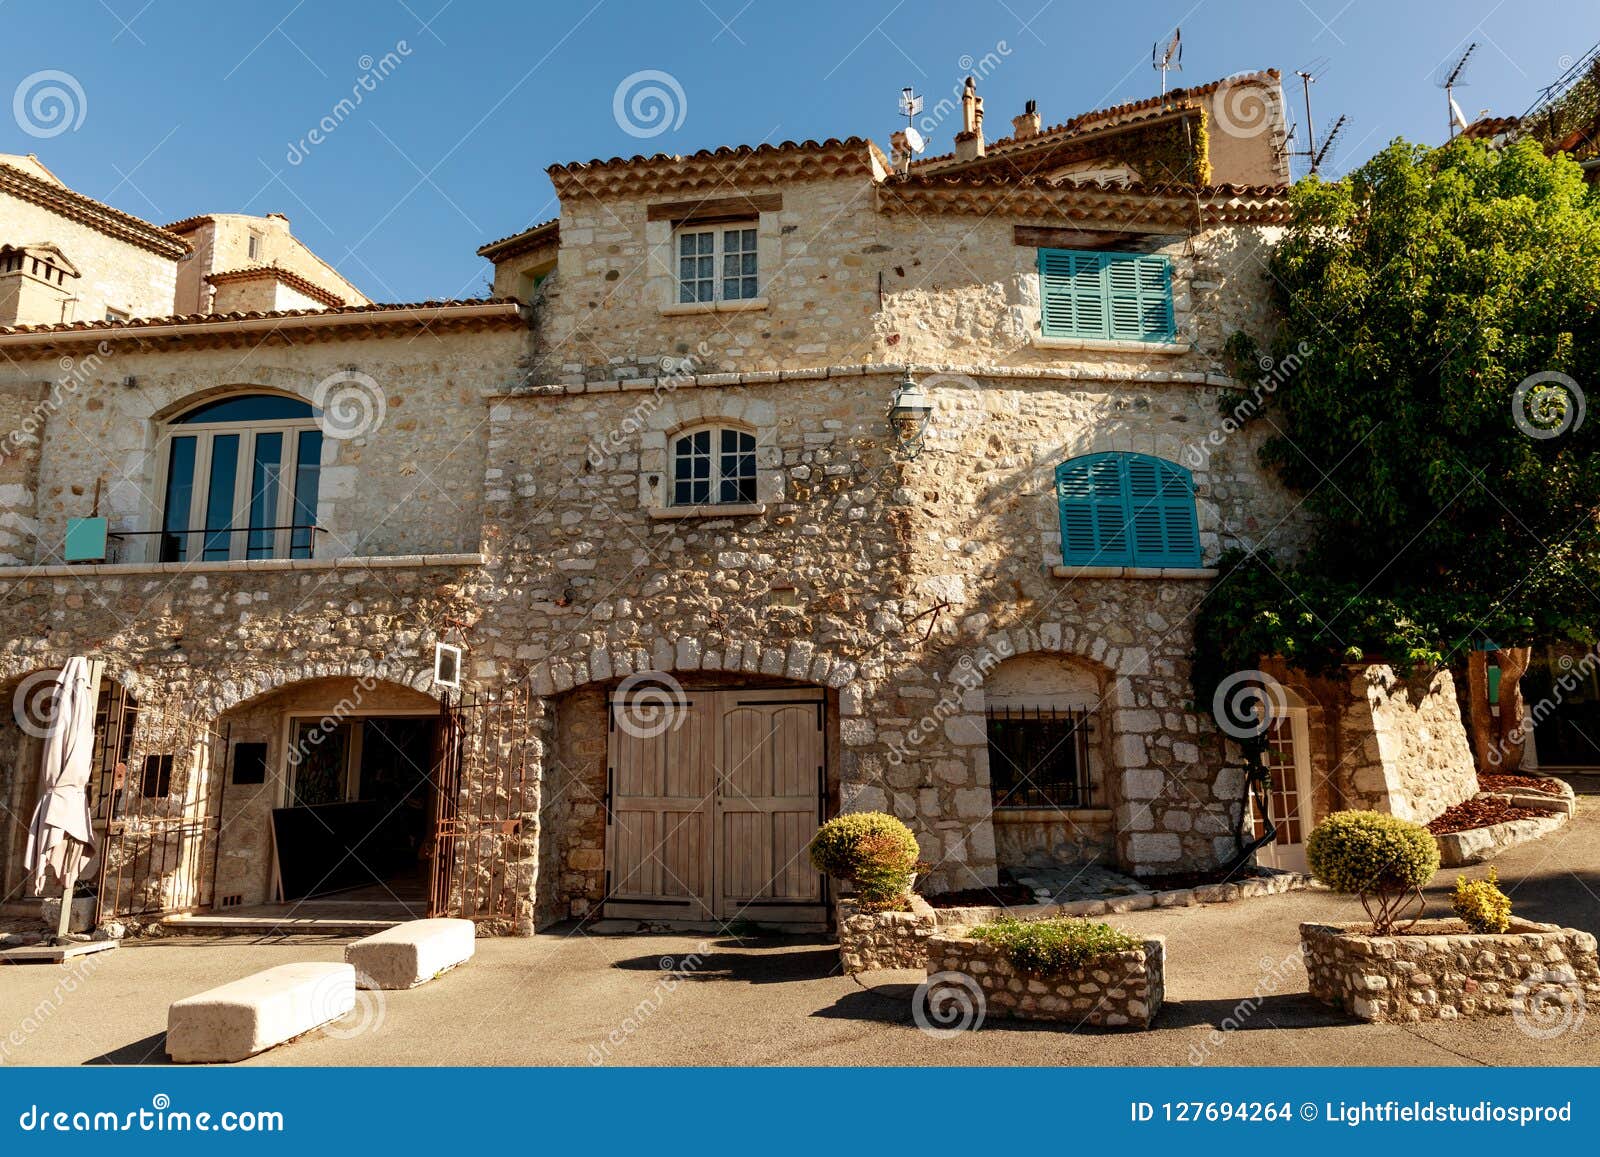 facade of luxury stone building at old european town, antibes, france